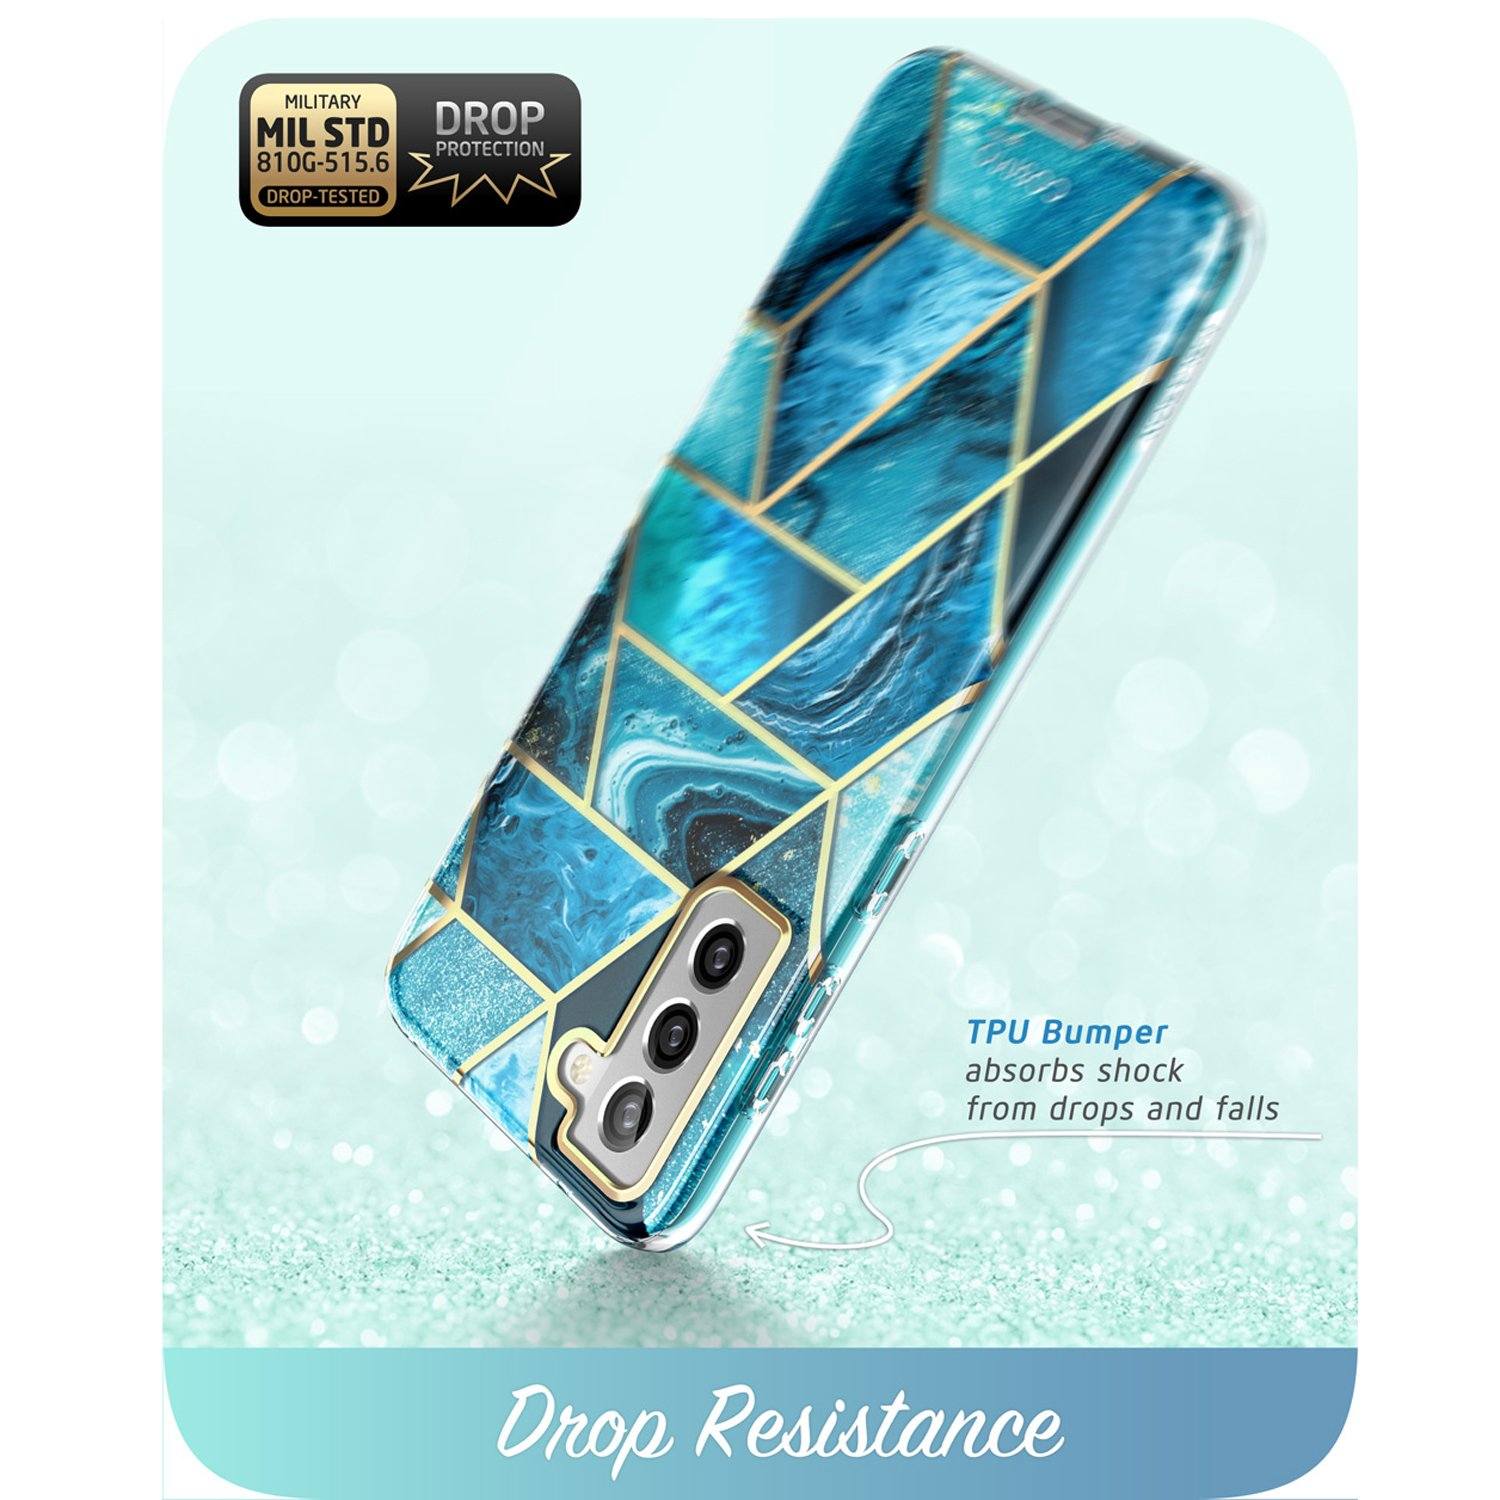 i-Blason Cosmo Series Case for Samsung Galaxy S21+(Without Screen Protector), Ocean S21 i-Blason 